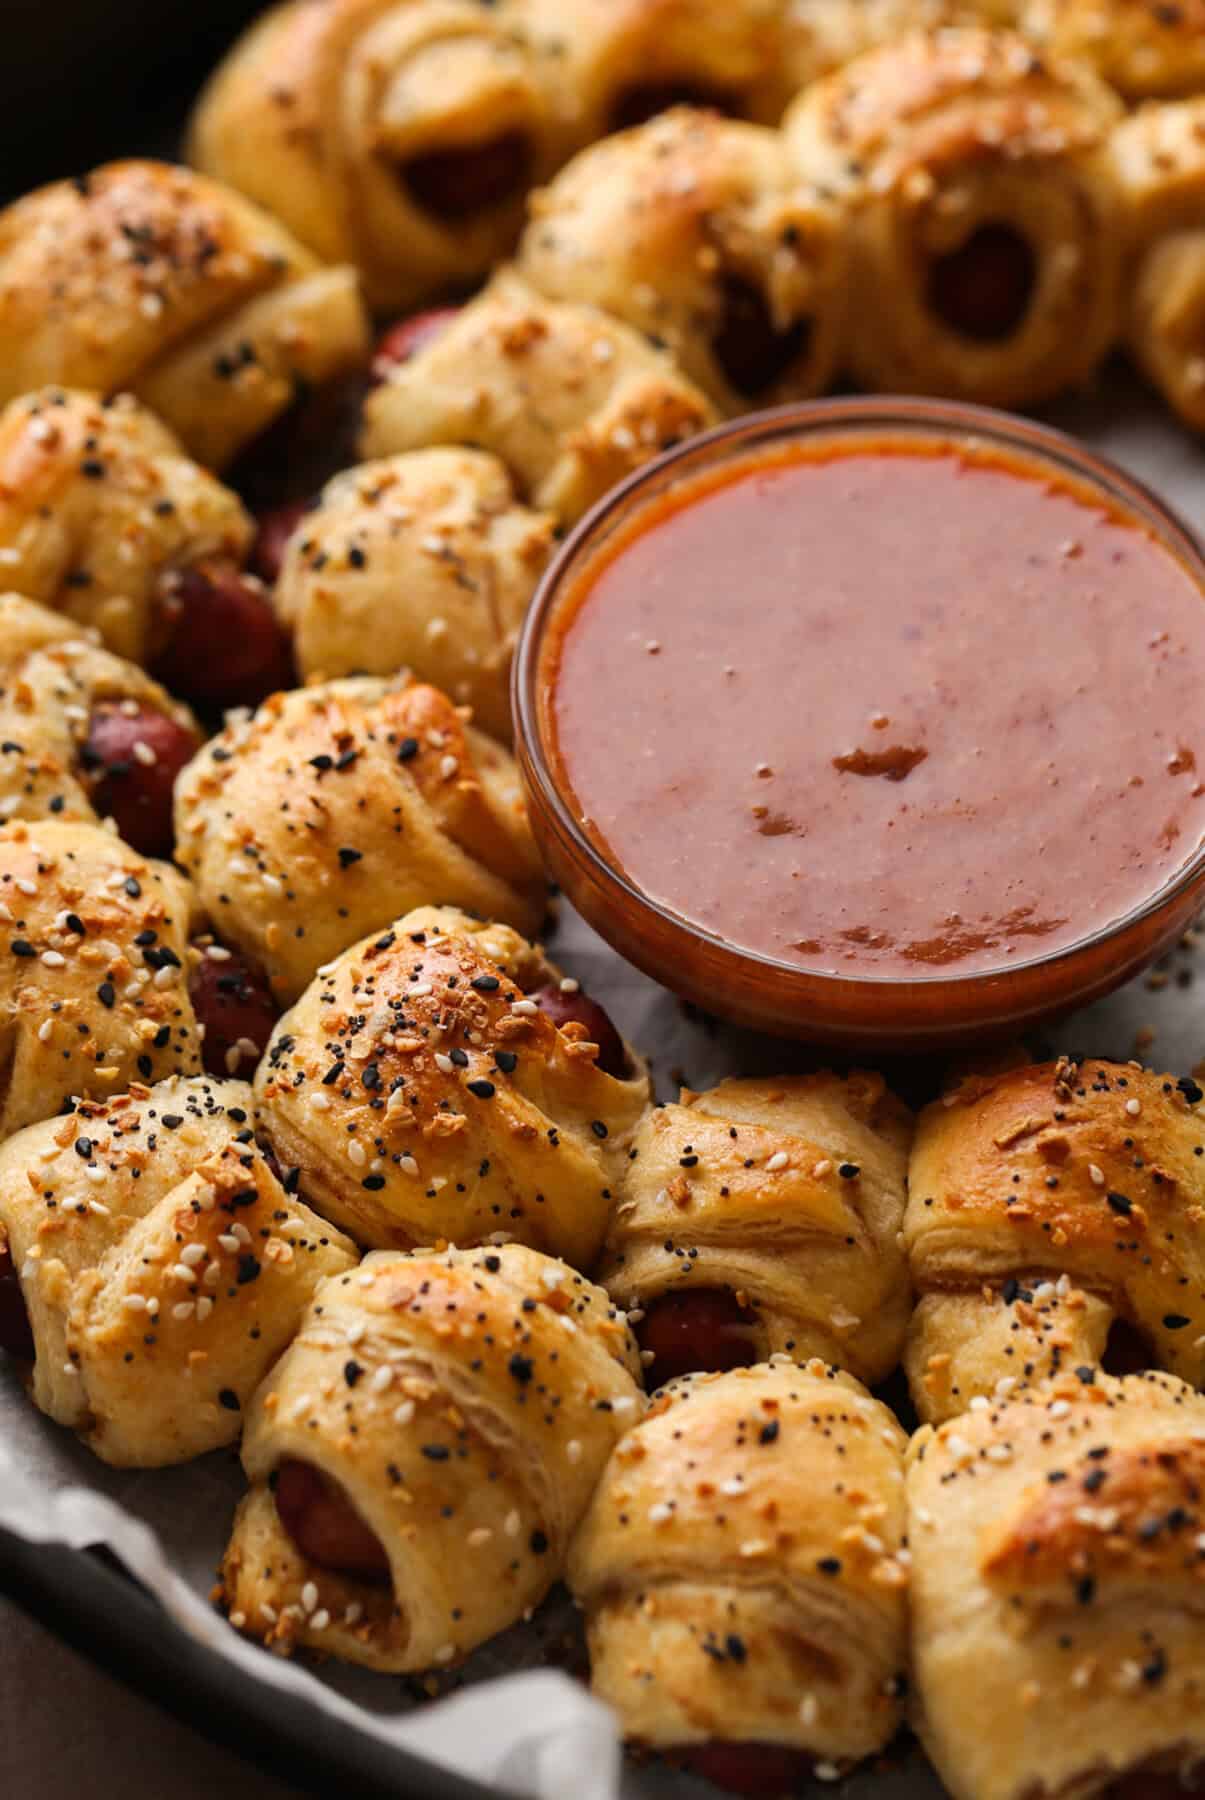 Pigs In a Blanket topped with everything seasoning and dipping sauce